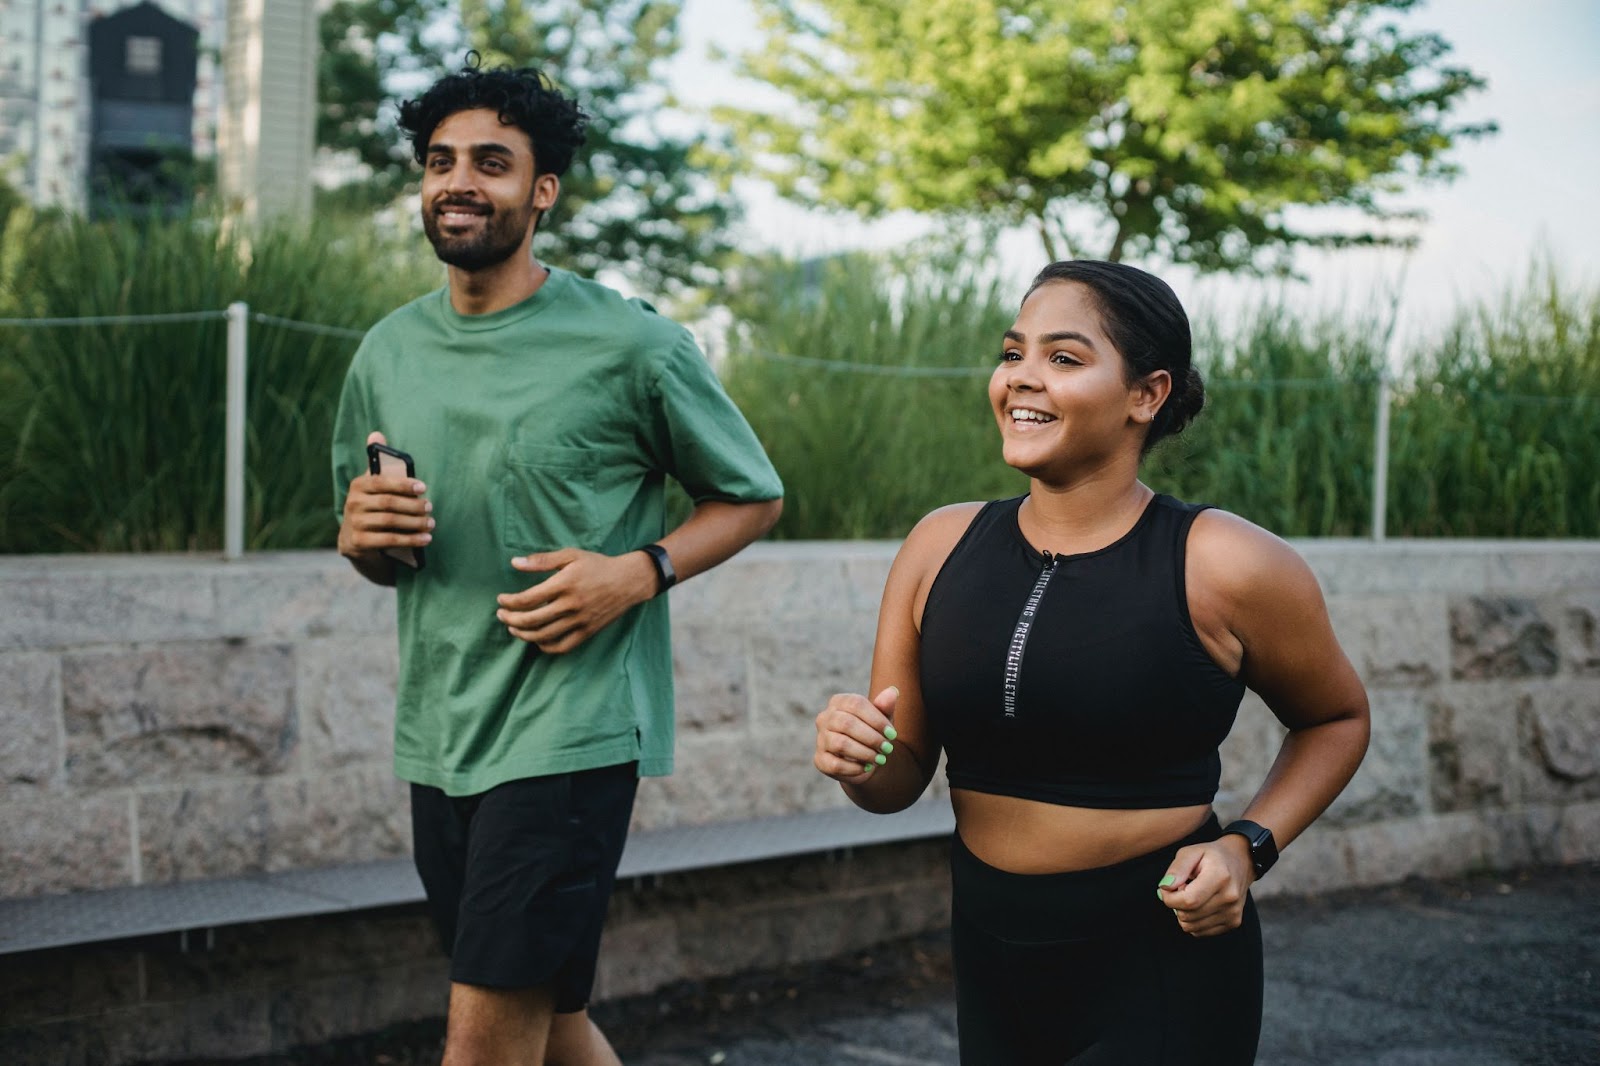 Two joggers outdoors: a man in green with a phone and a smiling woman in black sportswear.